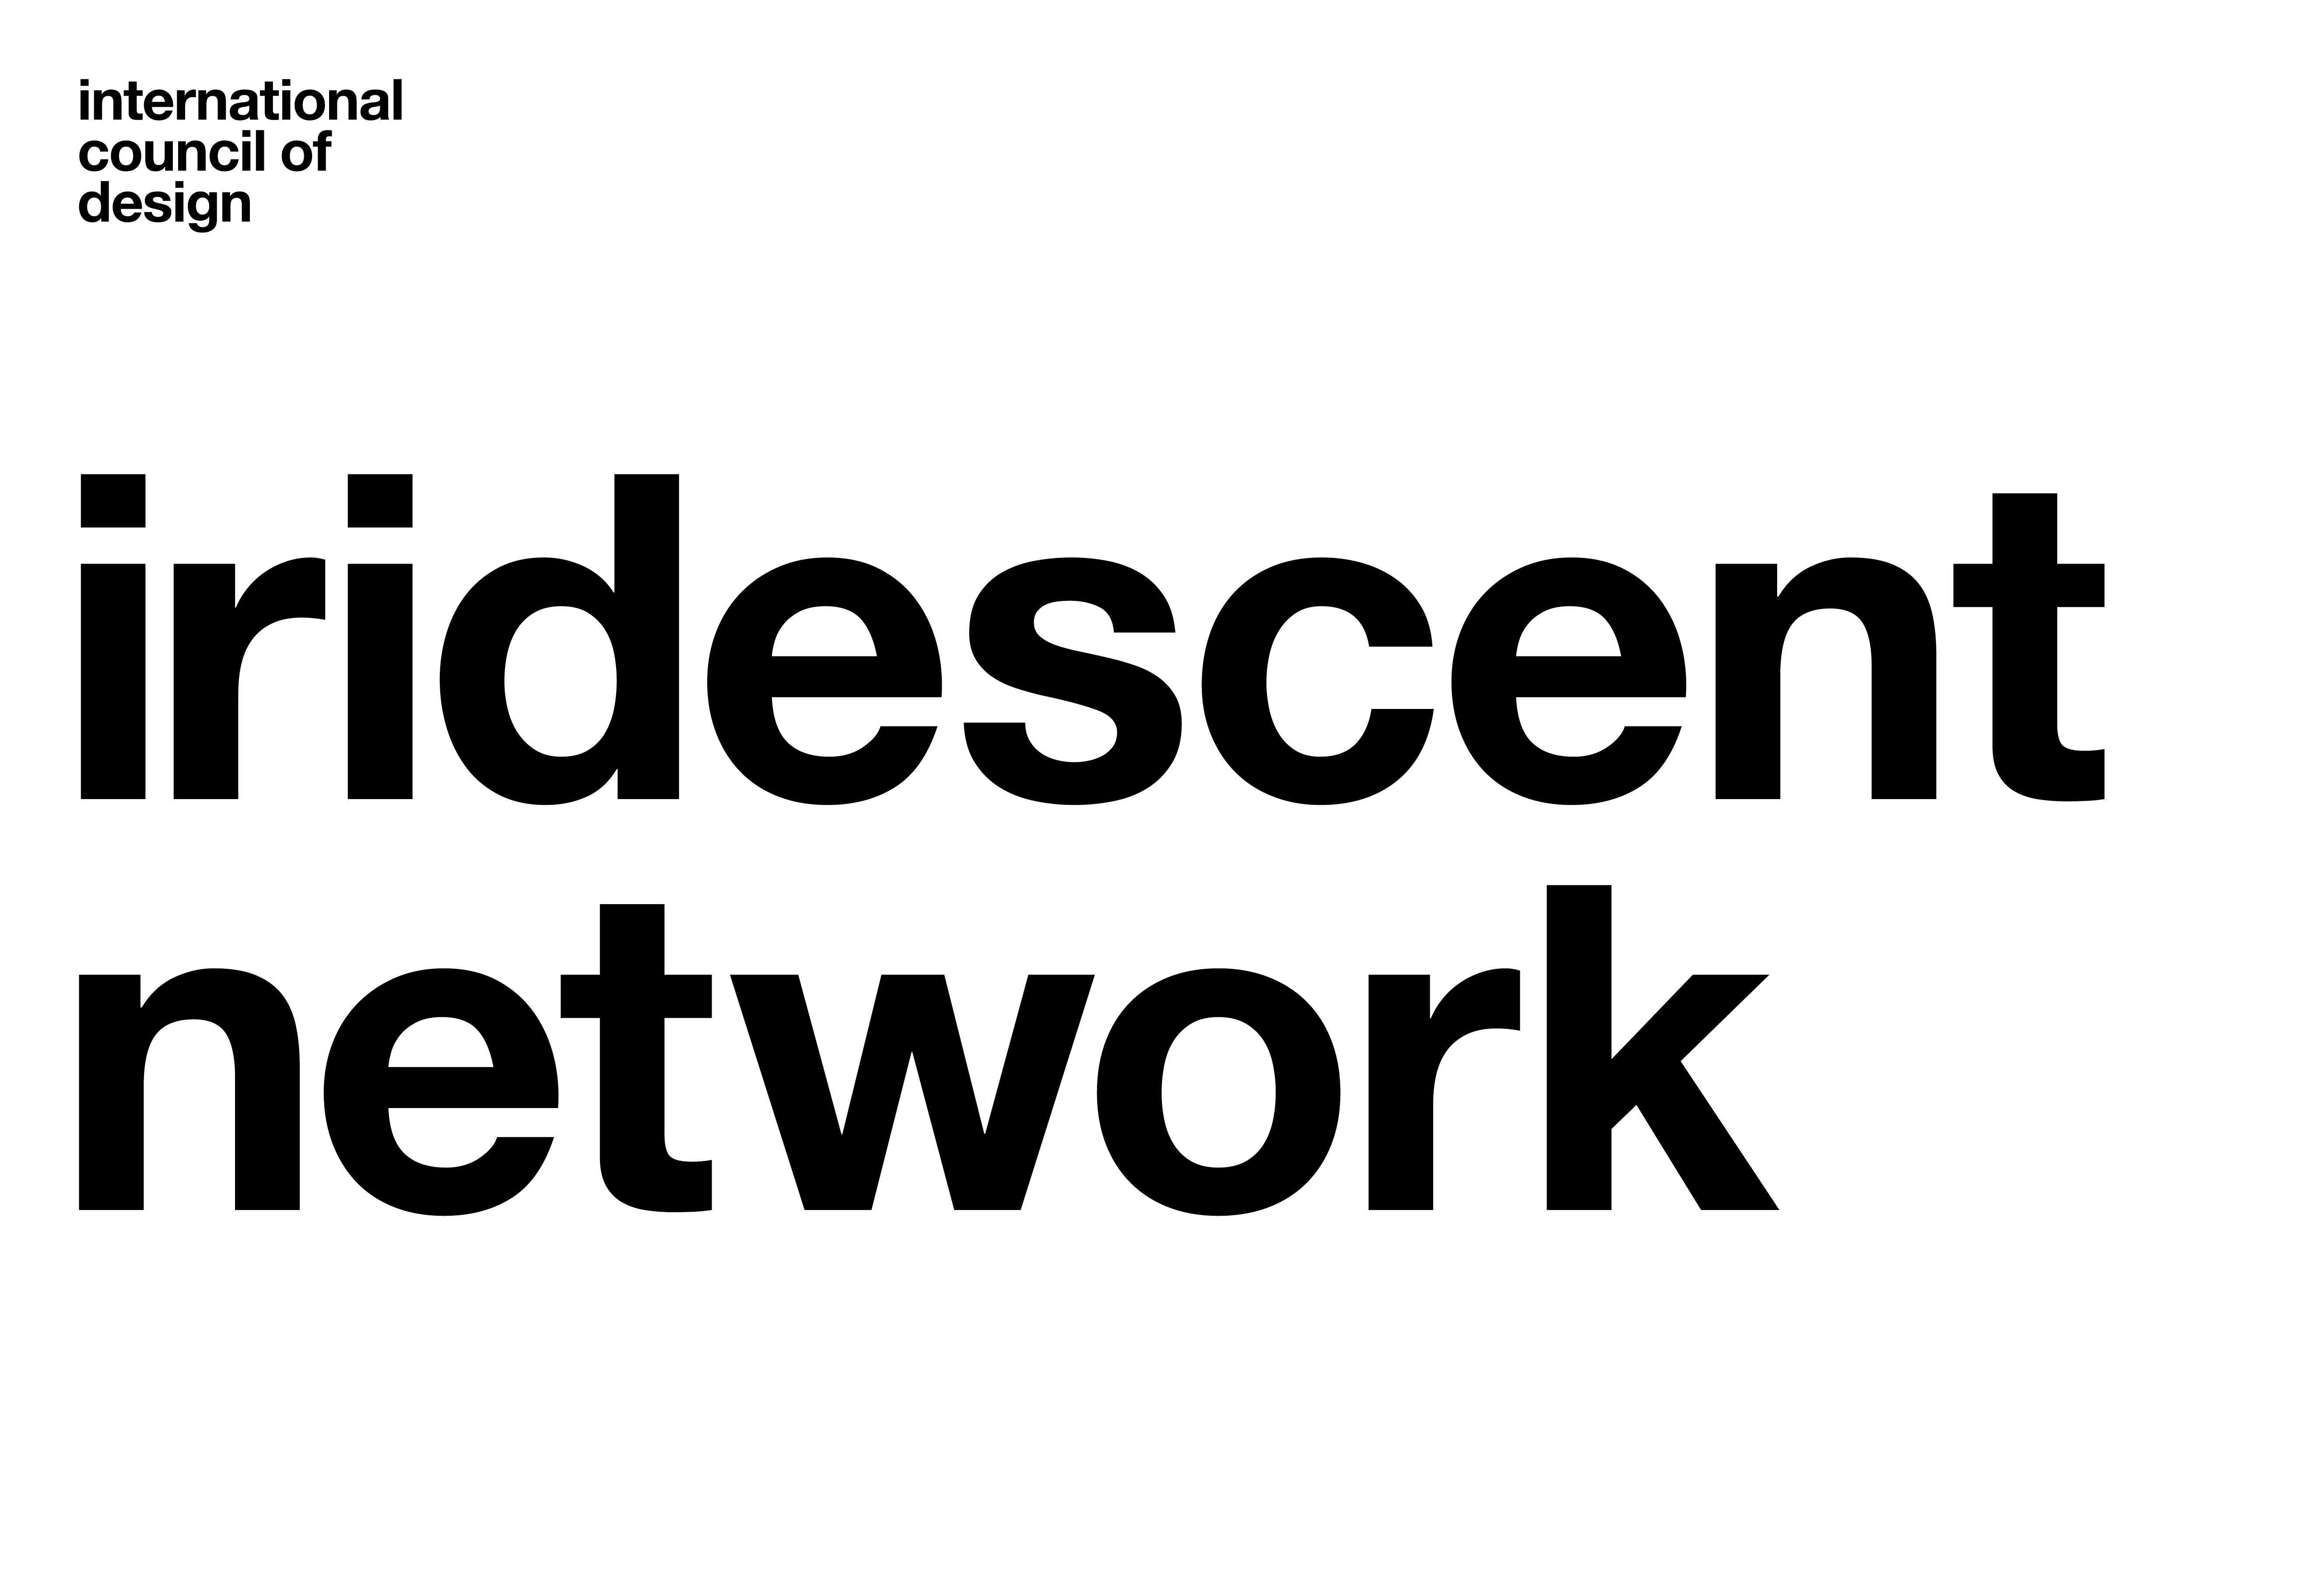 the council introduces the iridescent network